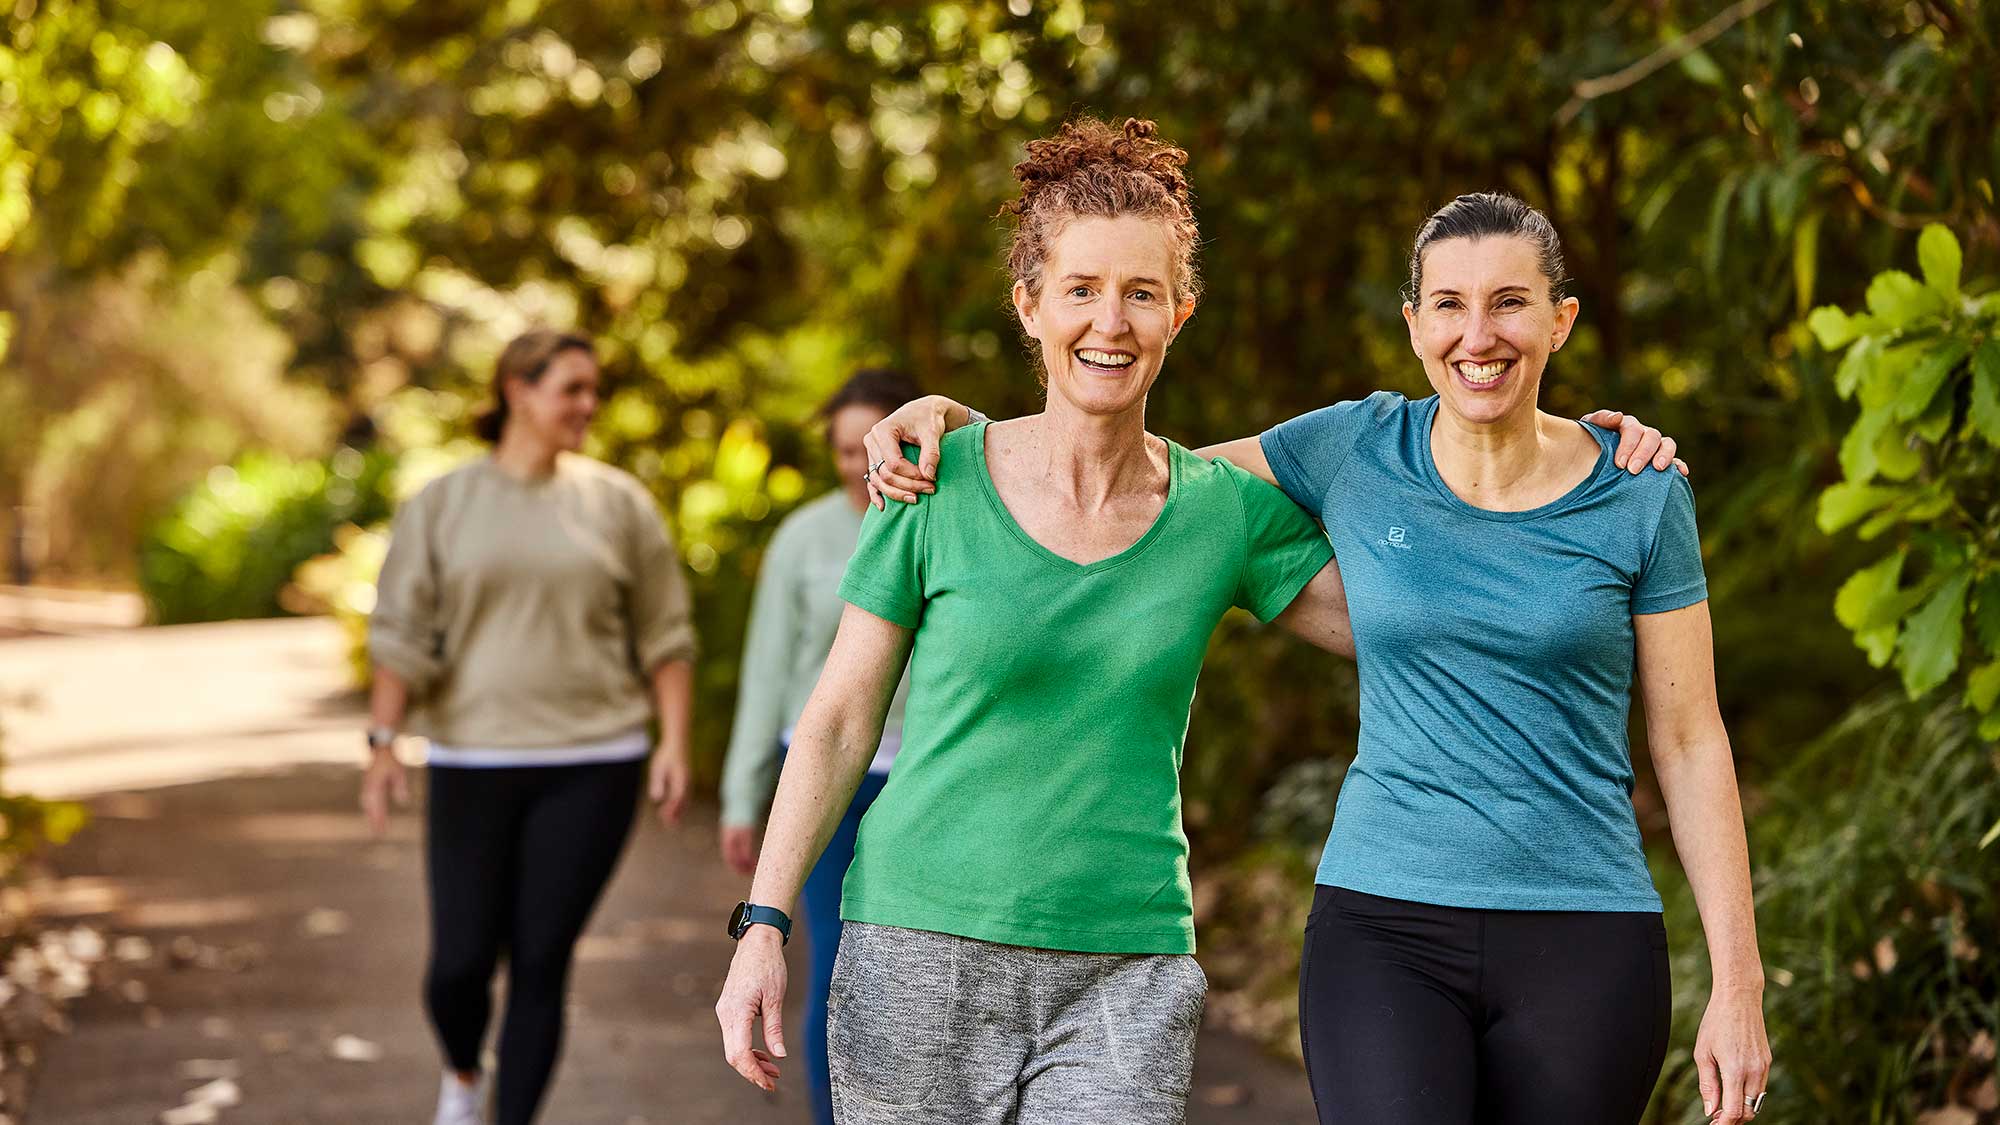 Two women arm in arm smiling as they walk, in their exercise gear